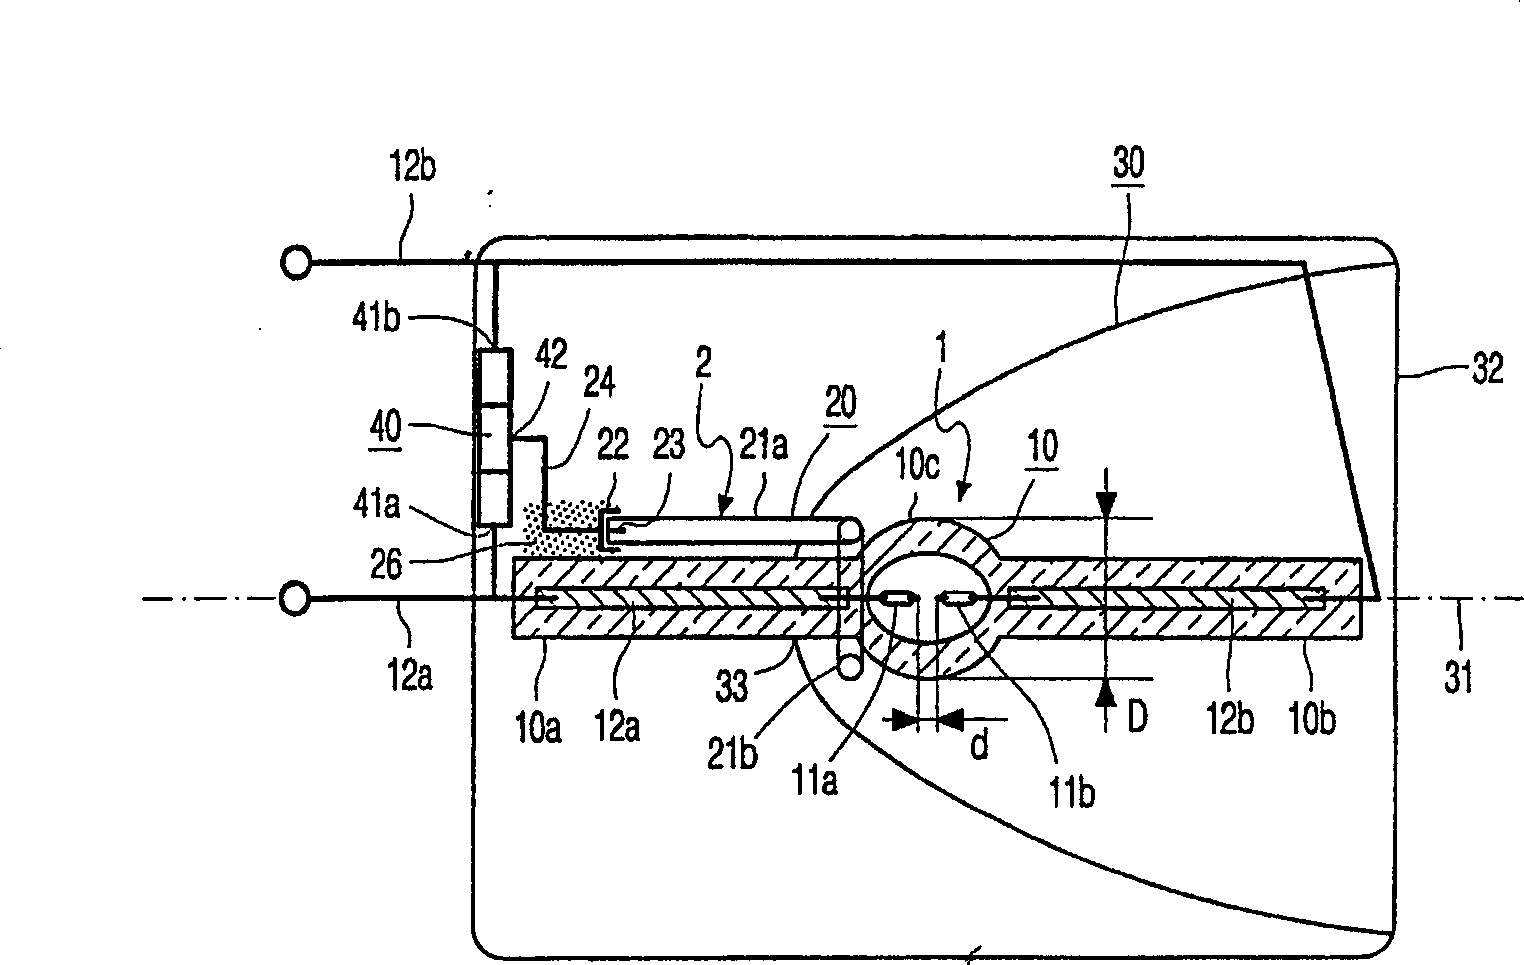 Unit comprising high-pressure discharging lamp and ignition antenna